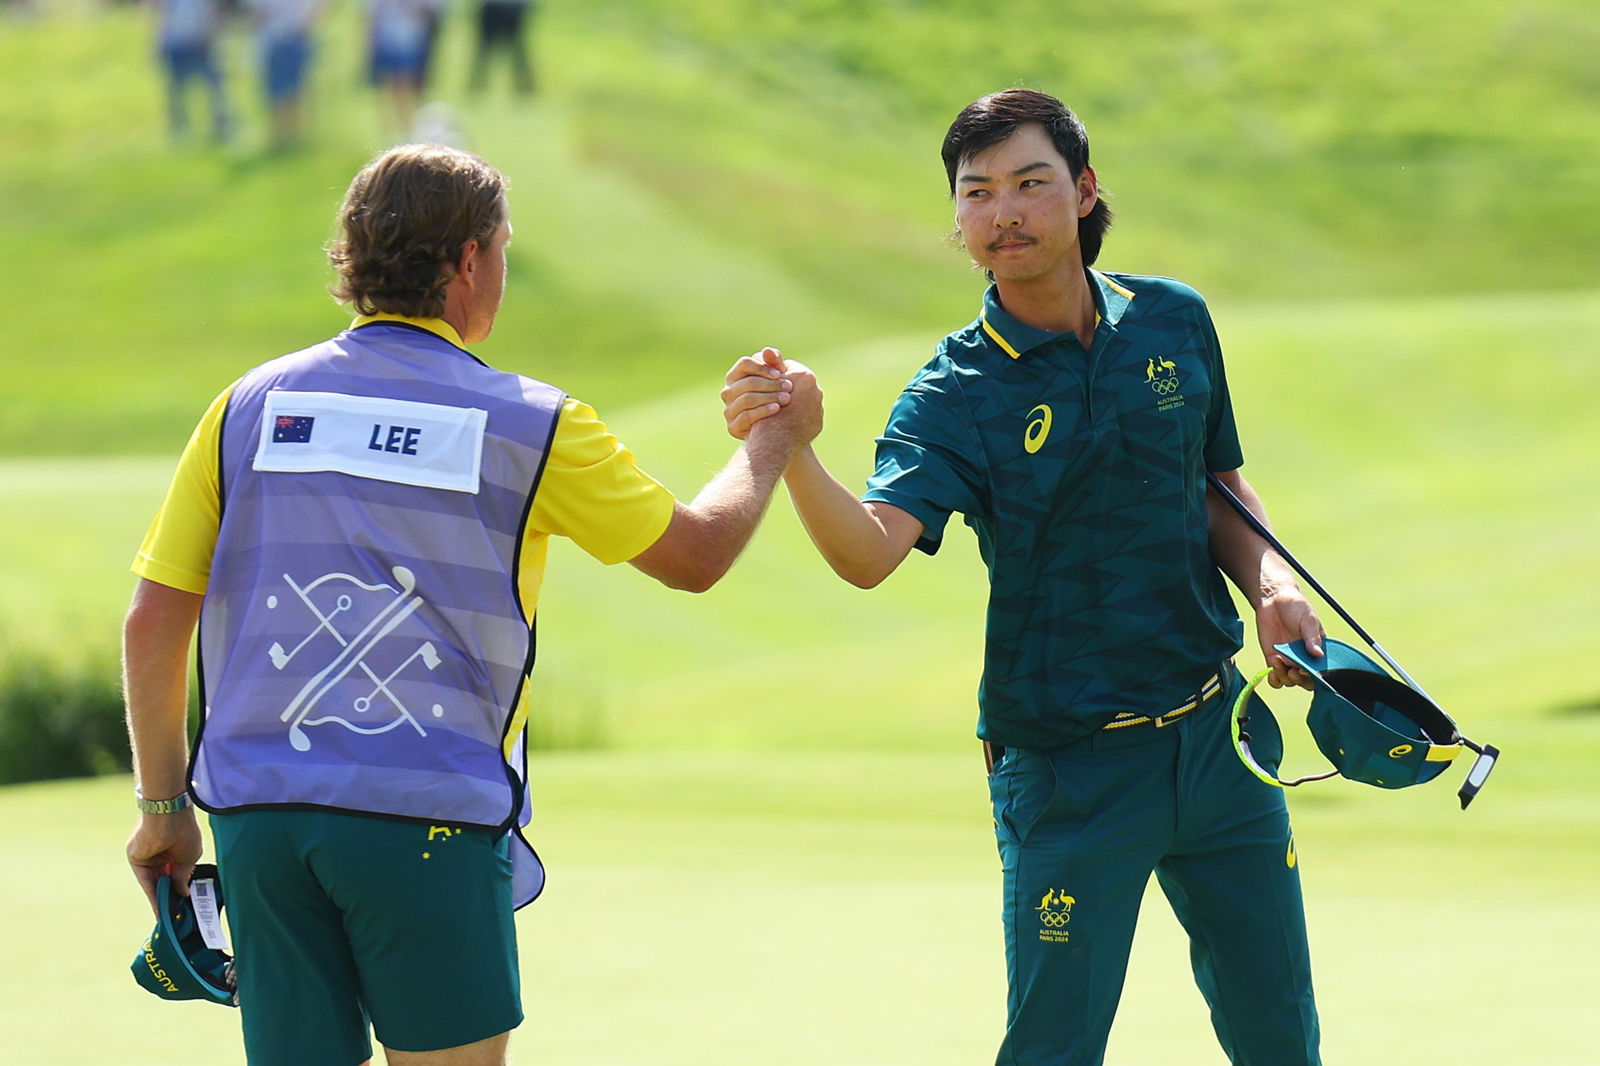 Min Woo Lee of Team Australia shakes hands with his caddie, Stuart Davidson on the 18th green during Day Two